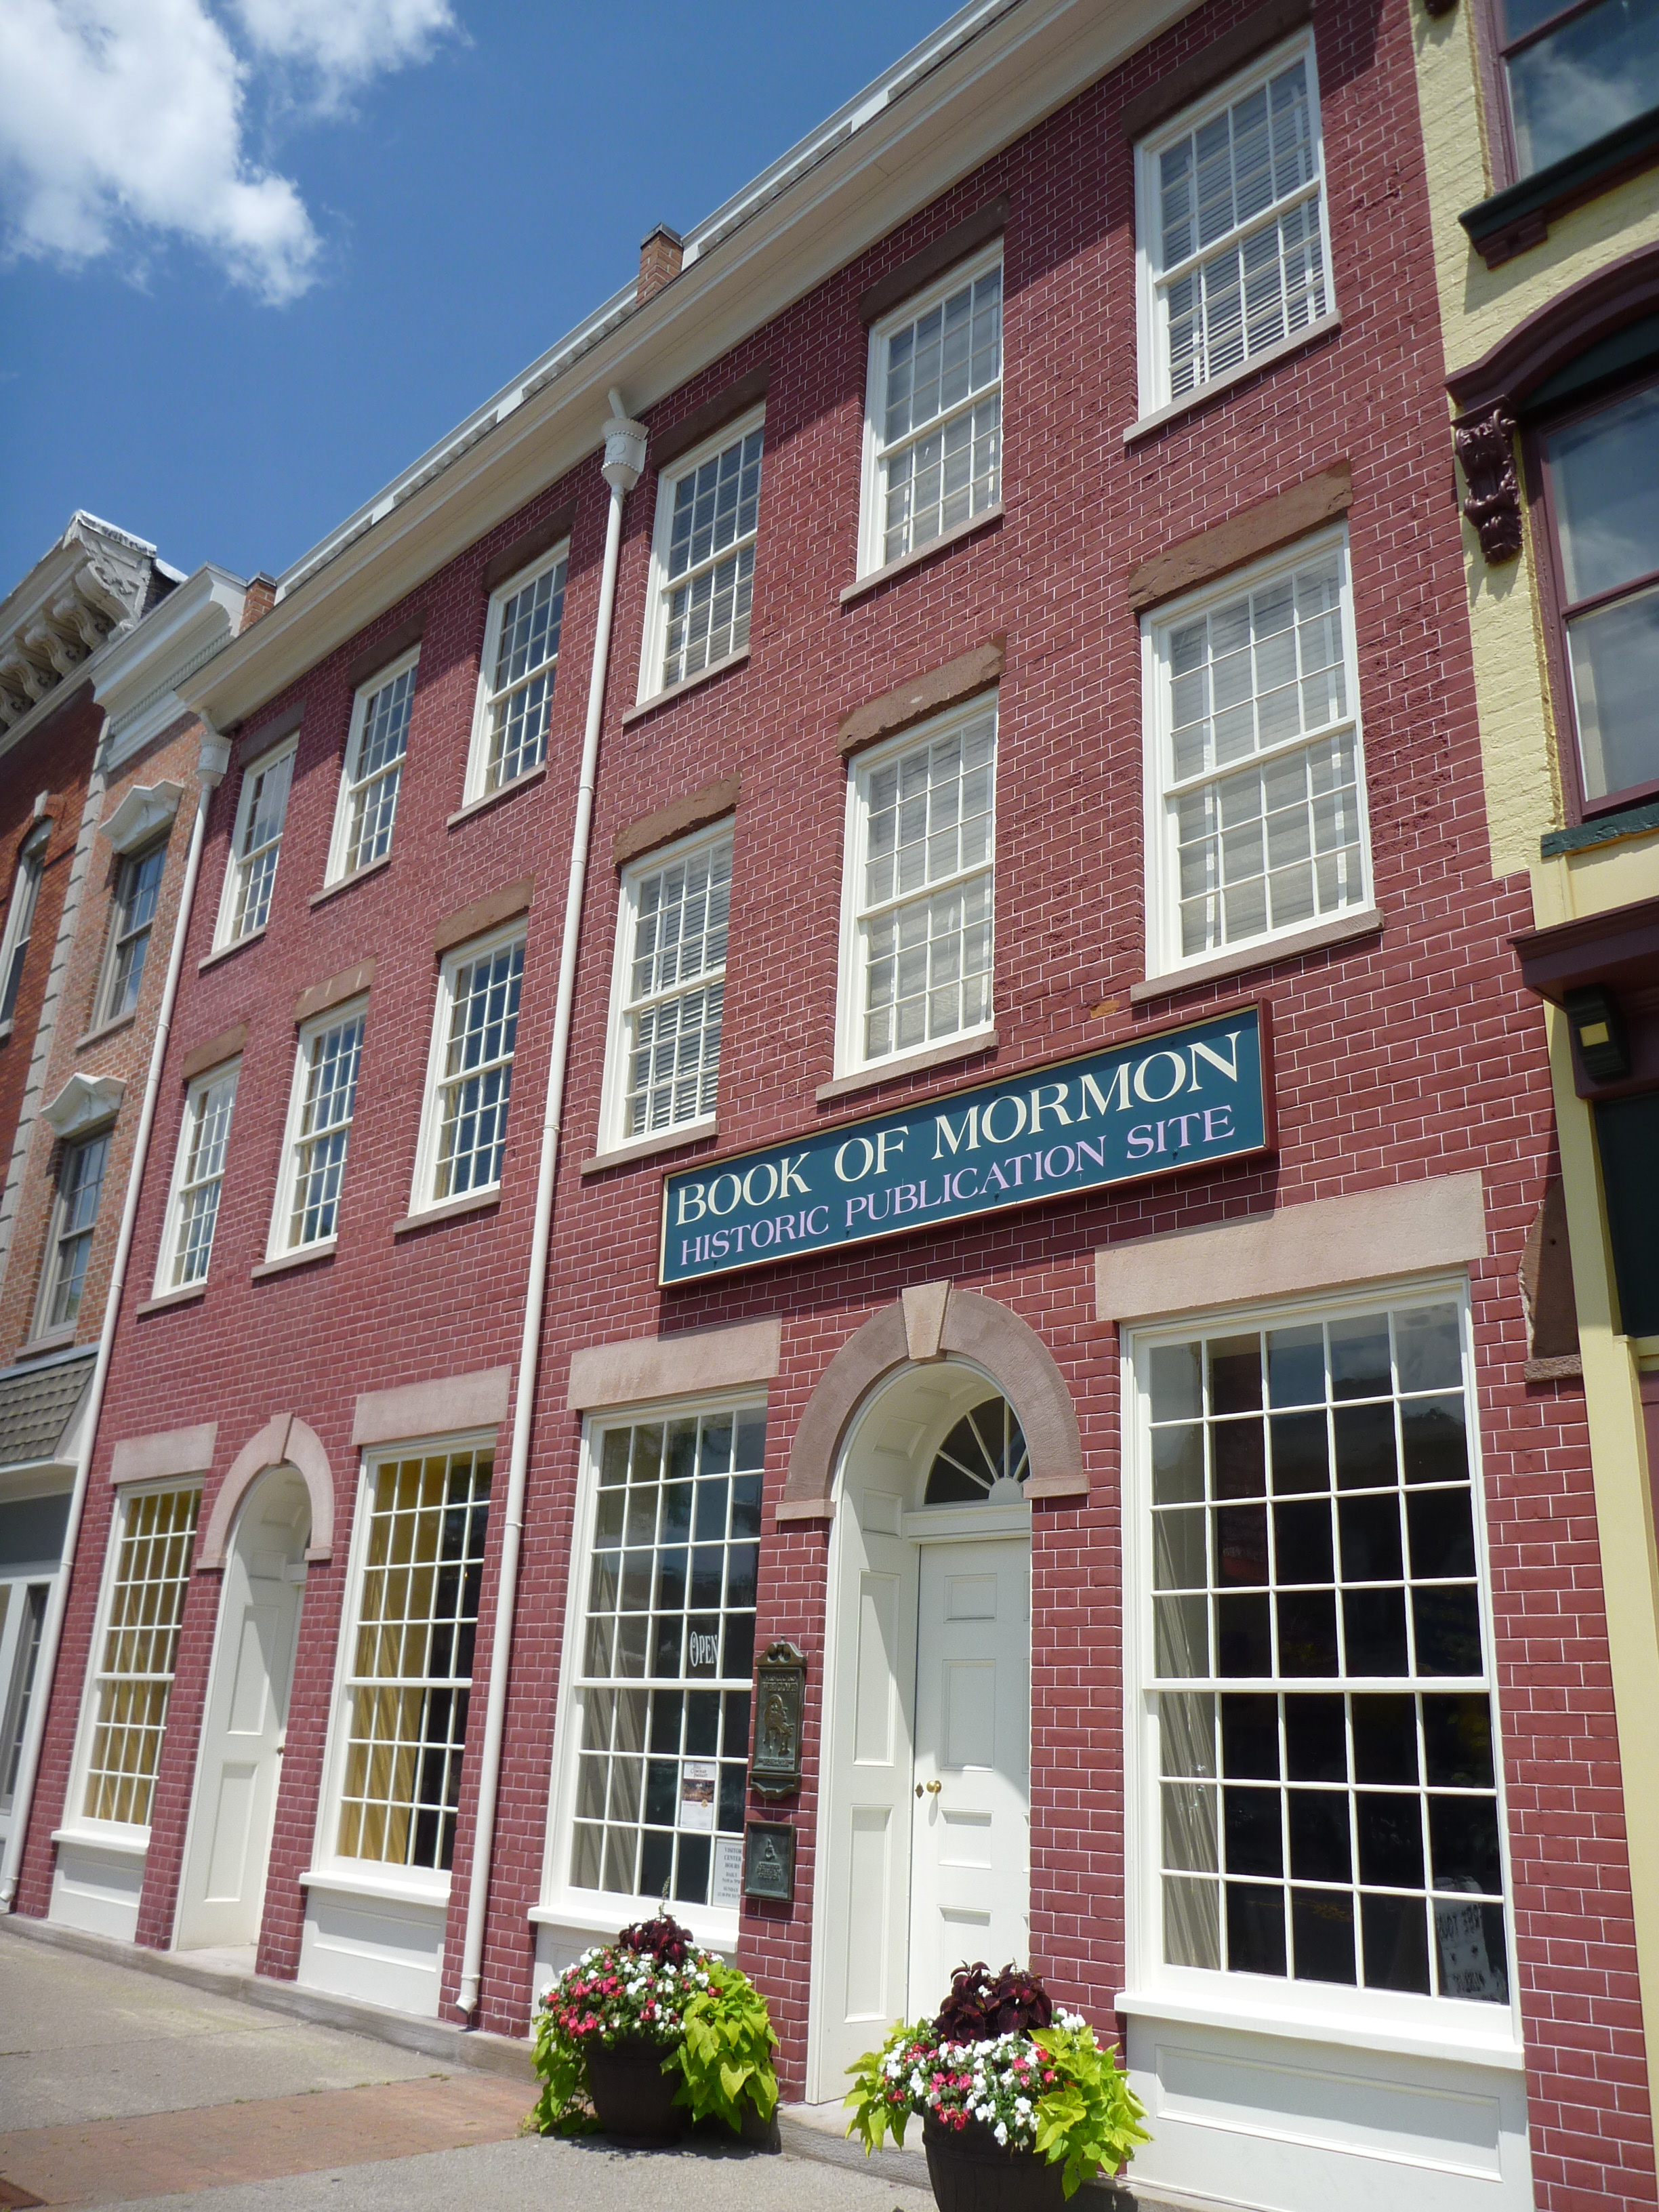 Grandin Building and the Original Printing of the Book of Mormon